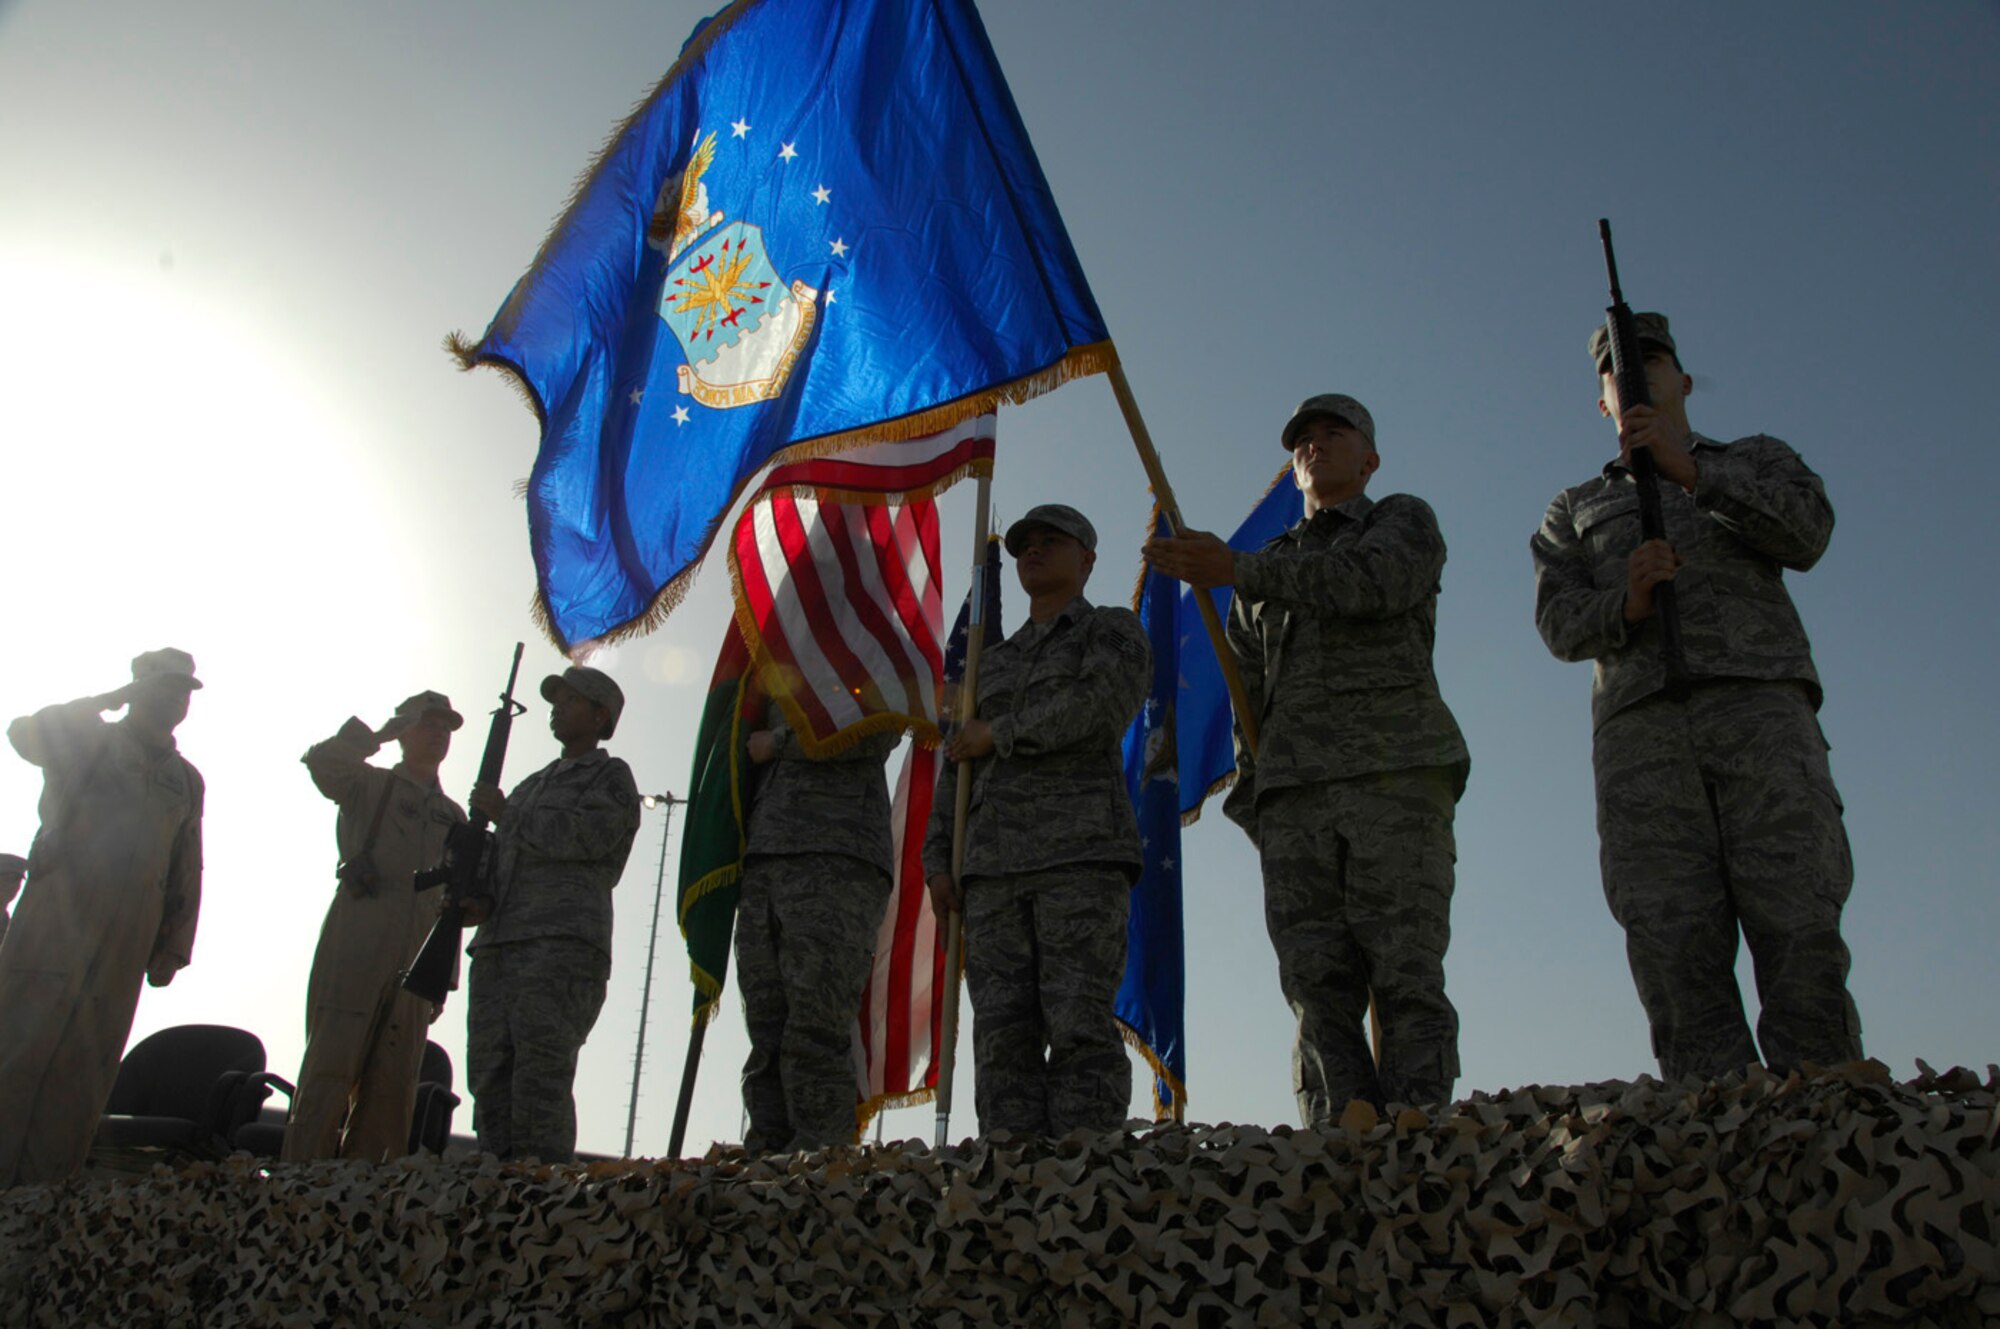 KANDAHAR AIRFIELD, Afghanistan - Lieutenant General Gary L. North, 9th Air Force and Air Forces Central commander (far left) and Brigadier General Guy M. Walsh, the new 451st Air Expeditionary Wing commander (second from left) salute as the Afghanistan and U.S. national anthems are played during an assumption of command and activation ceremony here July 2, 2009.  Unit Airmen, distinguished visitors and coalition partners attended as the 451st transitioned from a group to a wing at 7 a.m. General Walsh was the wing commander for the 175th Wing, Maryland Air National Guard before accepting his assignment here.  (U.S. Air Force photo by 1st Lt. Noelle Caldwell)